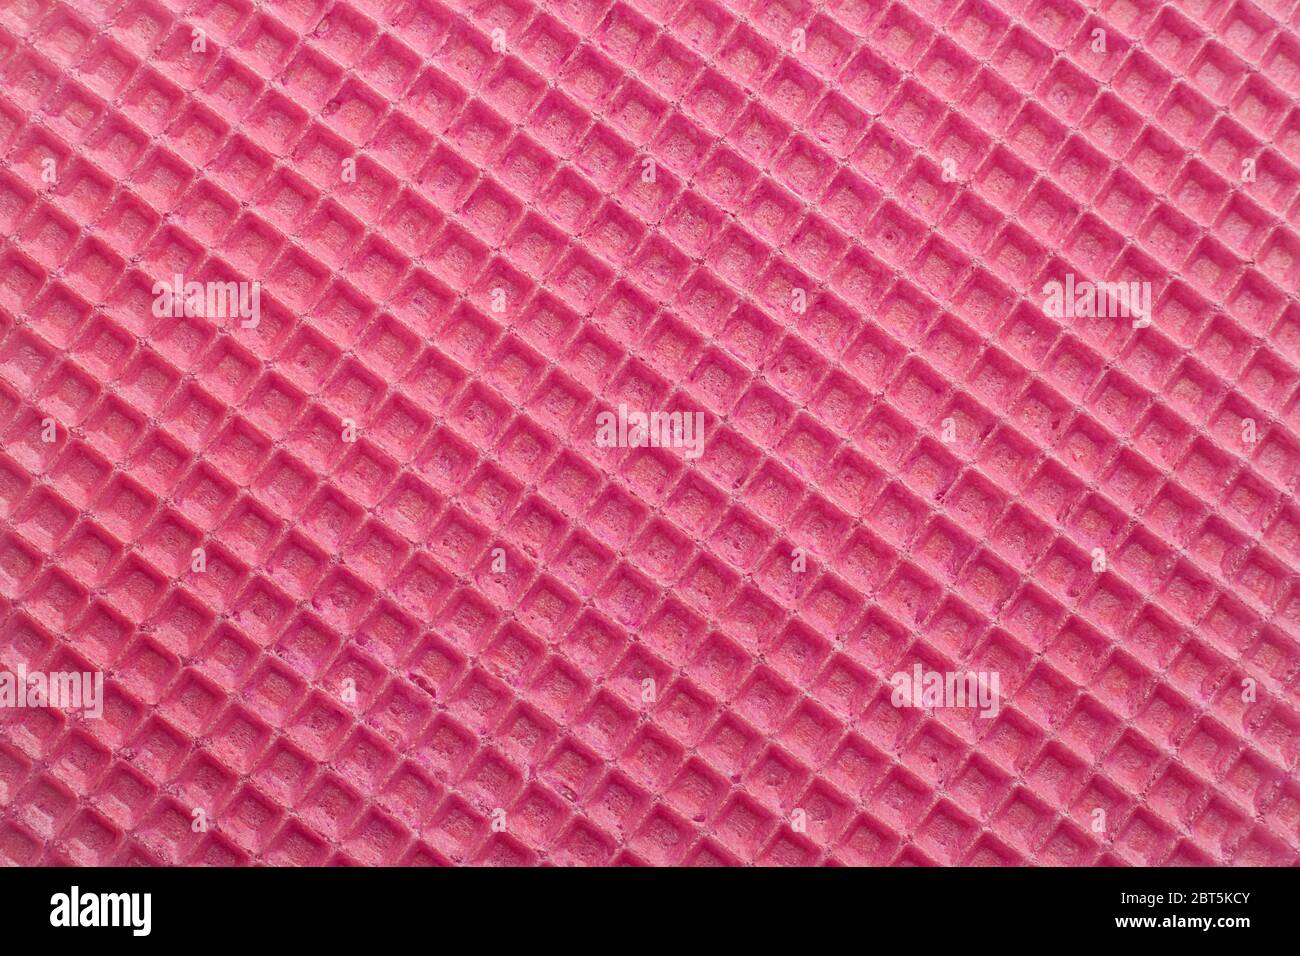 Red waffles surface closeup detail background Stock Photo